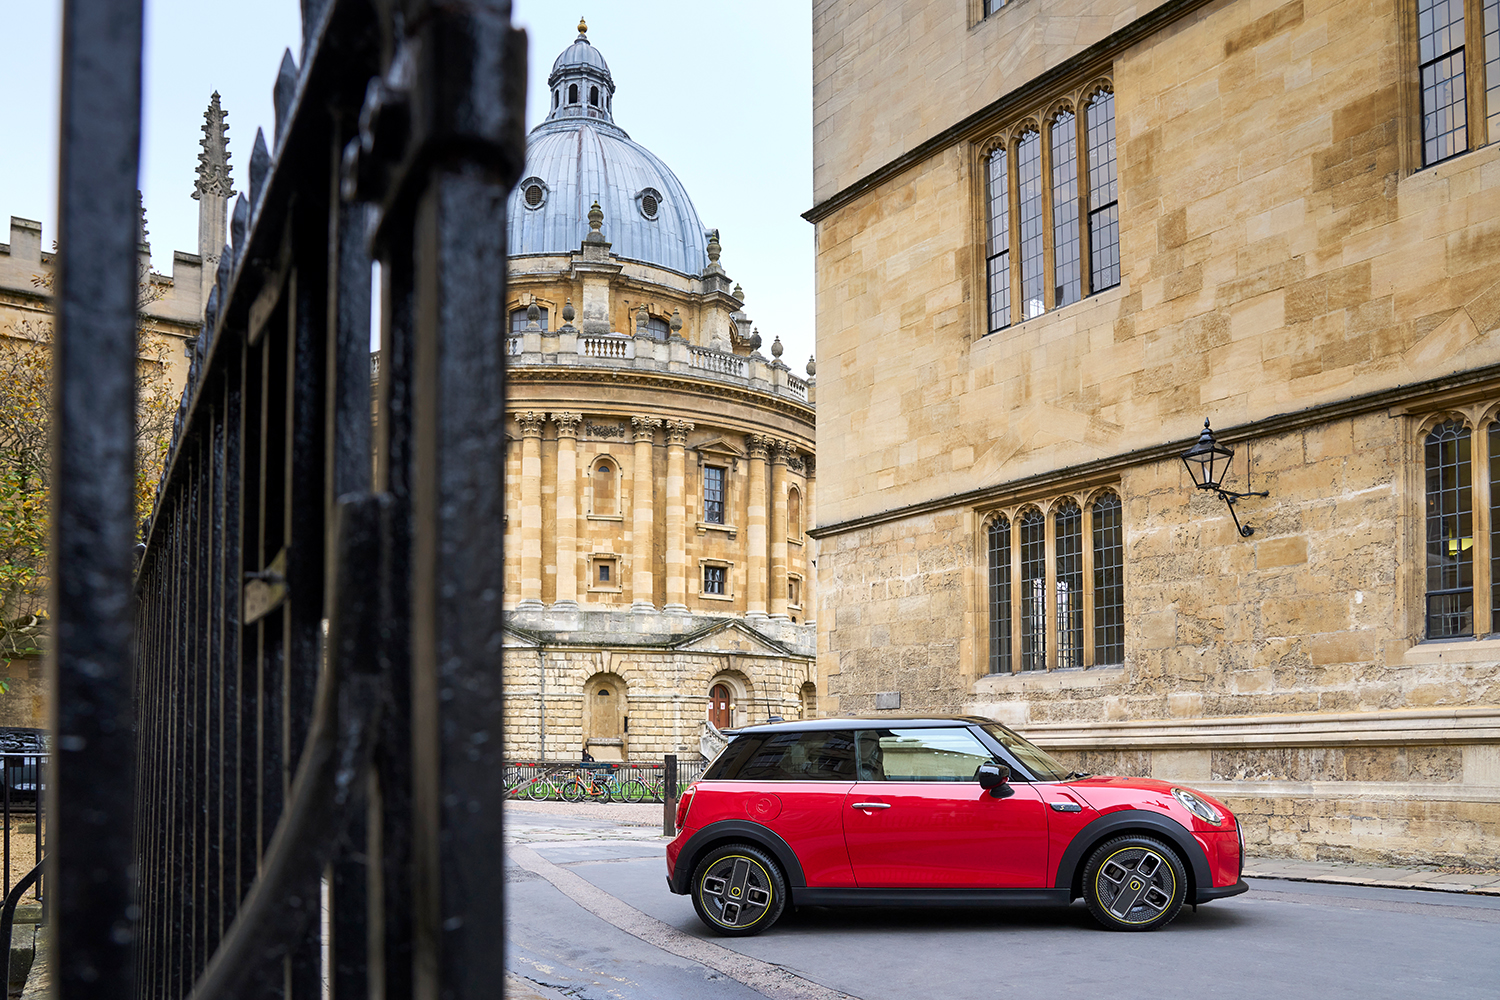 Red MINI standing in front of Radcliffe Camera in Oxford.